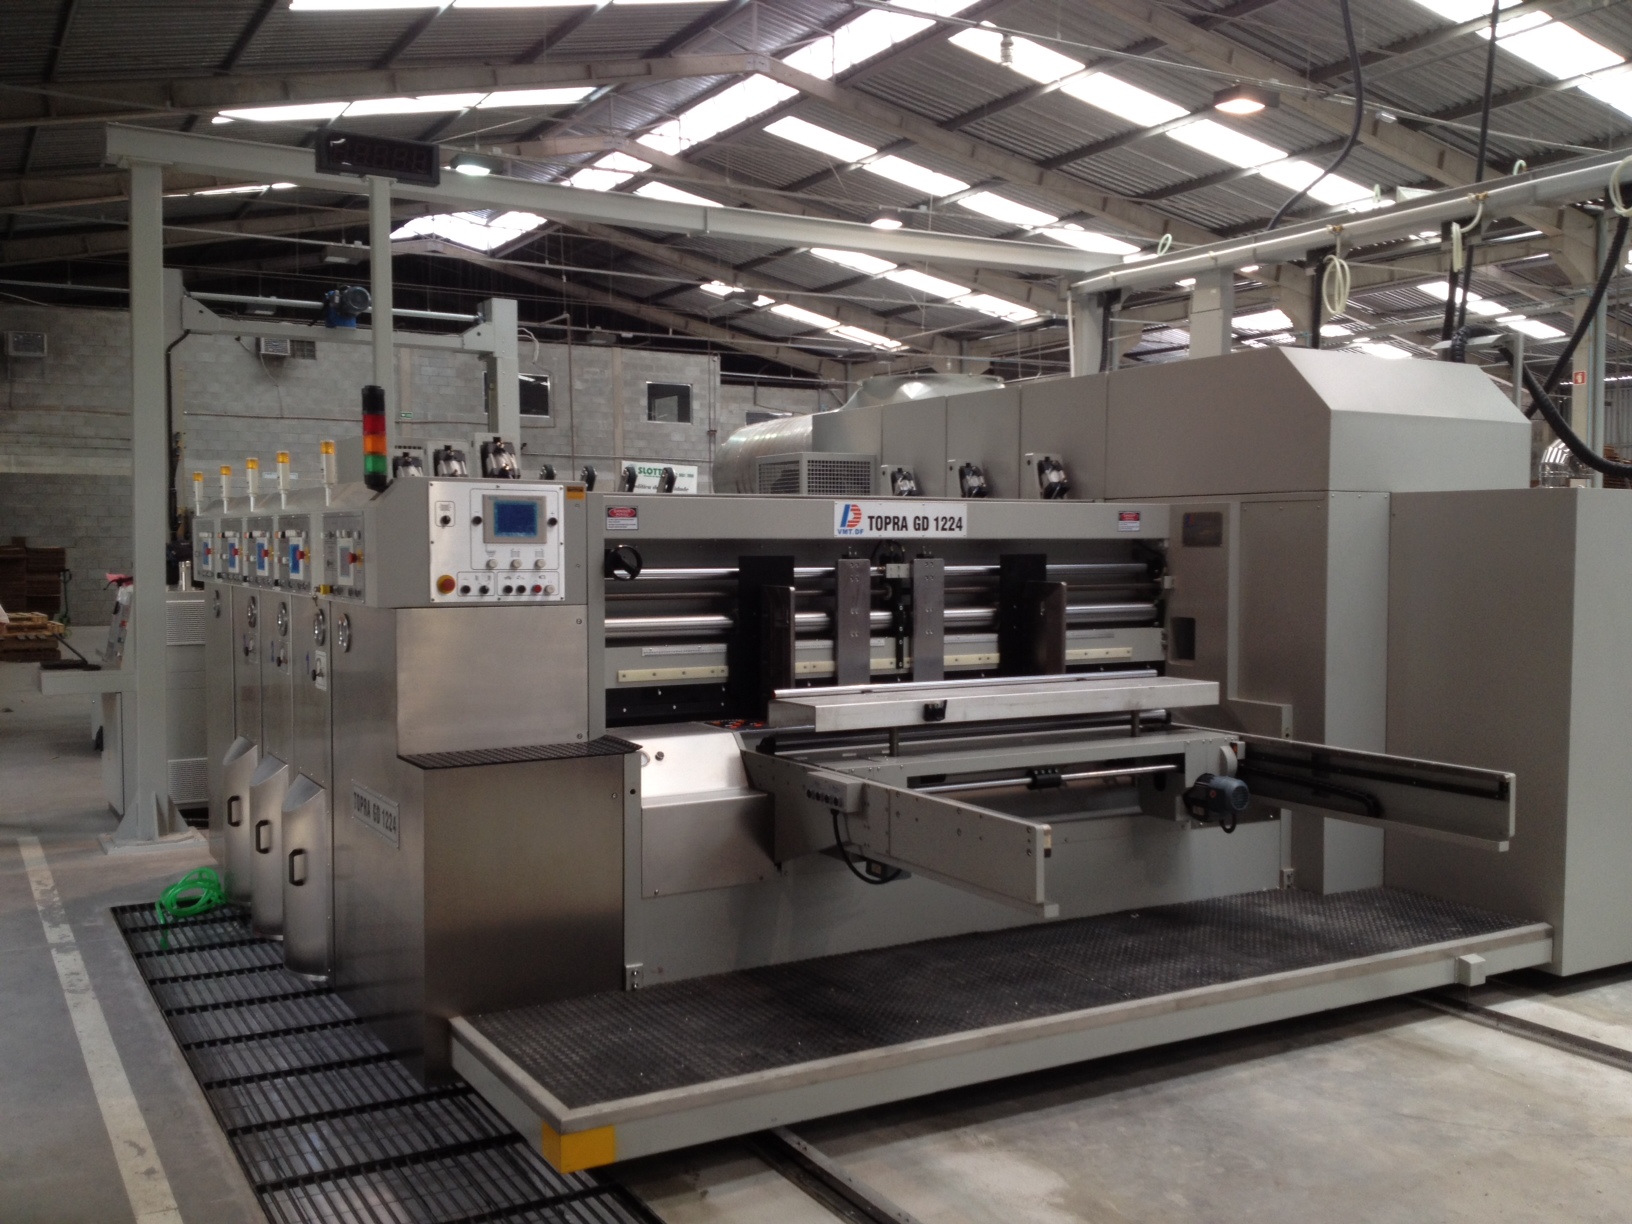 Shown is the Topra GD 1224 (1200mm X 2400mm max feed size)